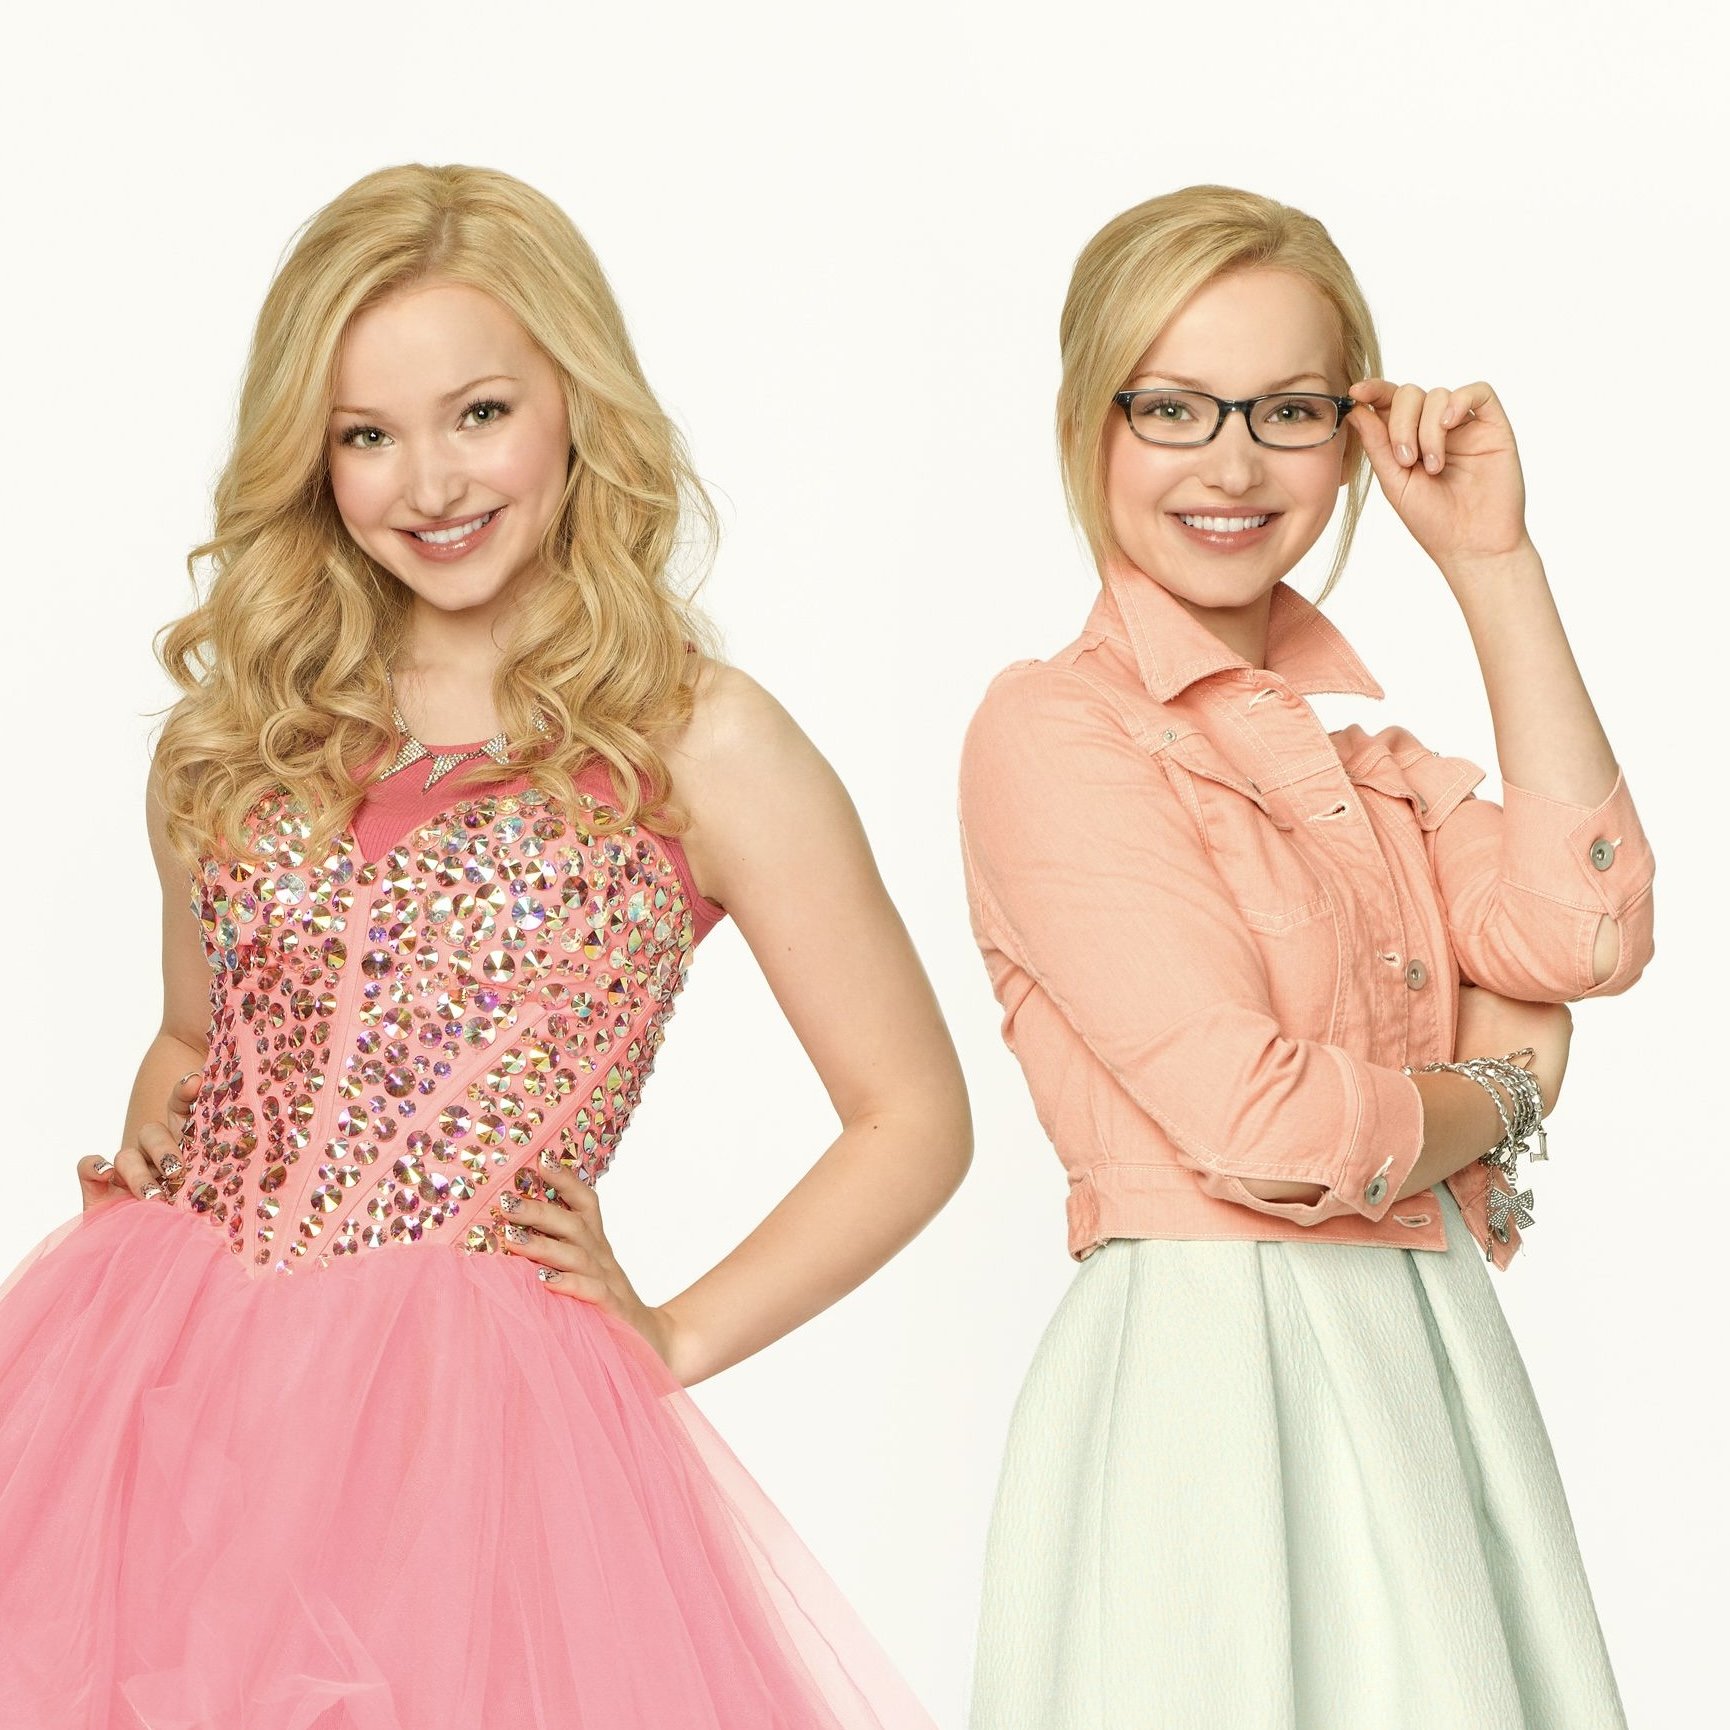 Better in Stereo — Cast - Liv and Maddie | Last.fm